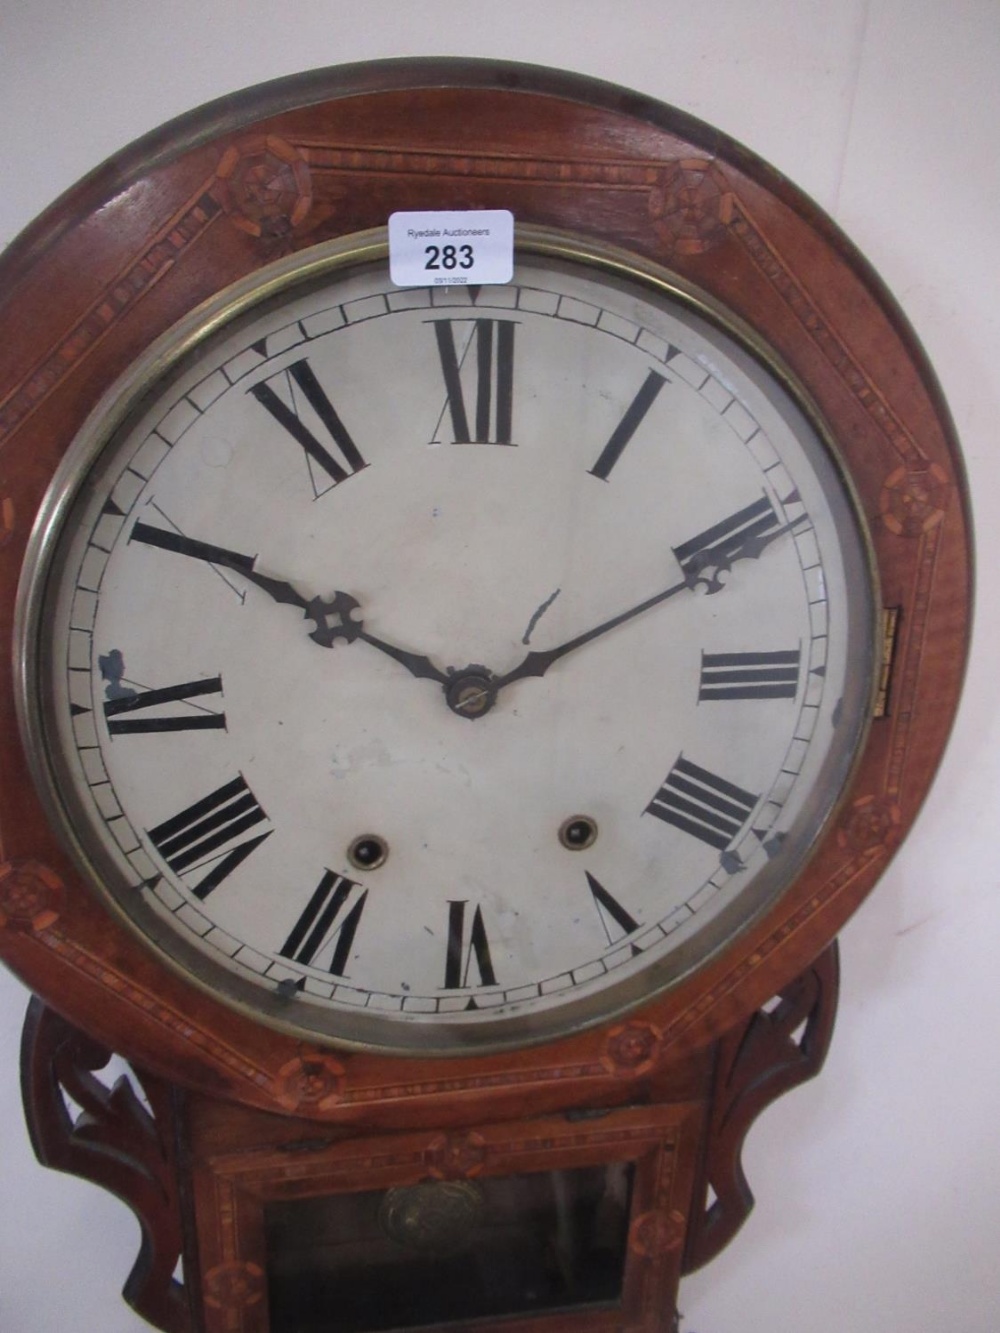 Jerome & Co. superior 8 day Anglo-American clocks, late C19th/early C20th inlaid walnut drop dial - Image 2 of 4